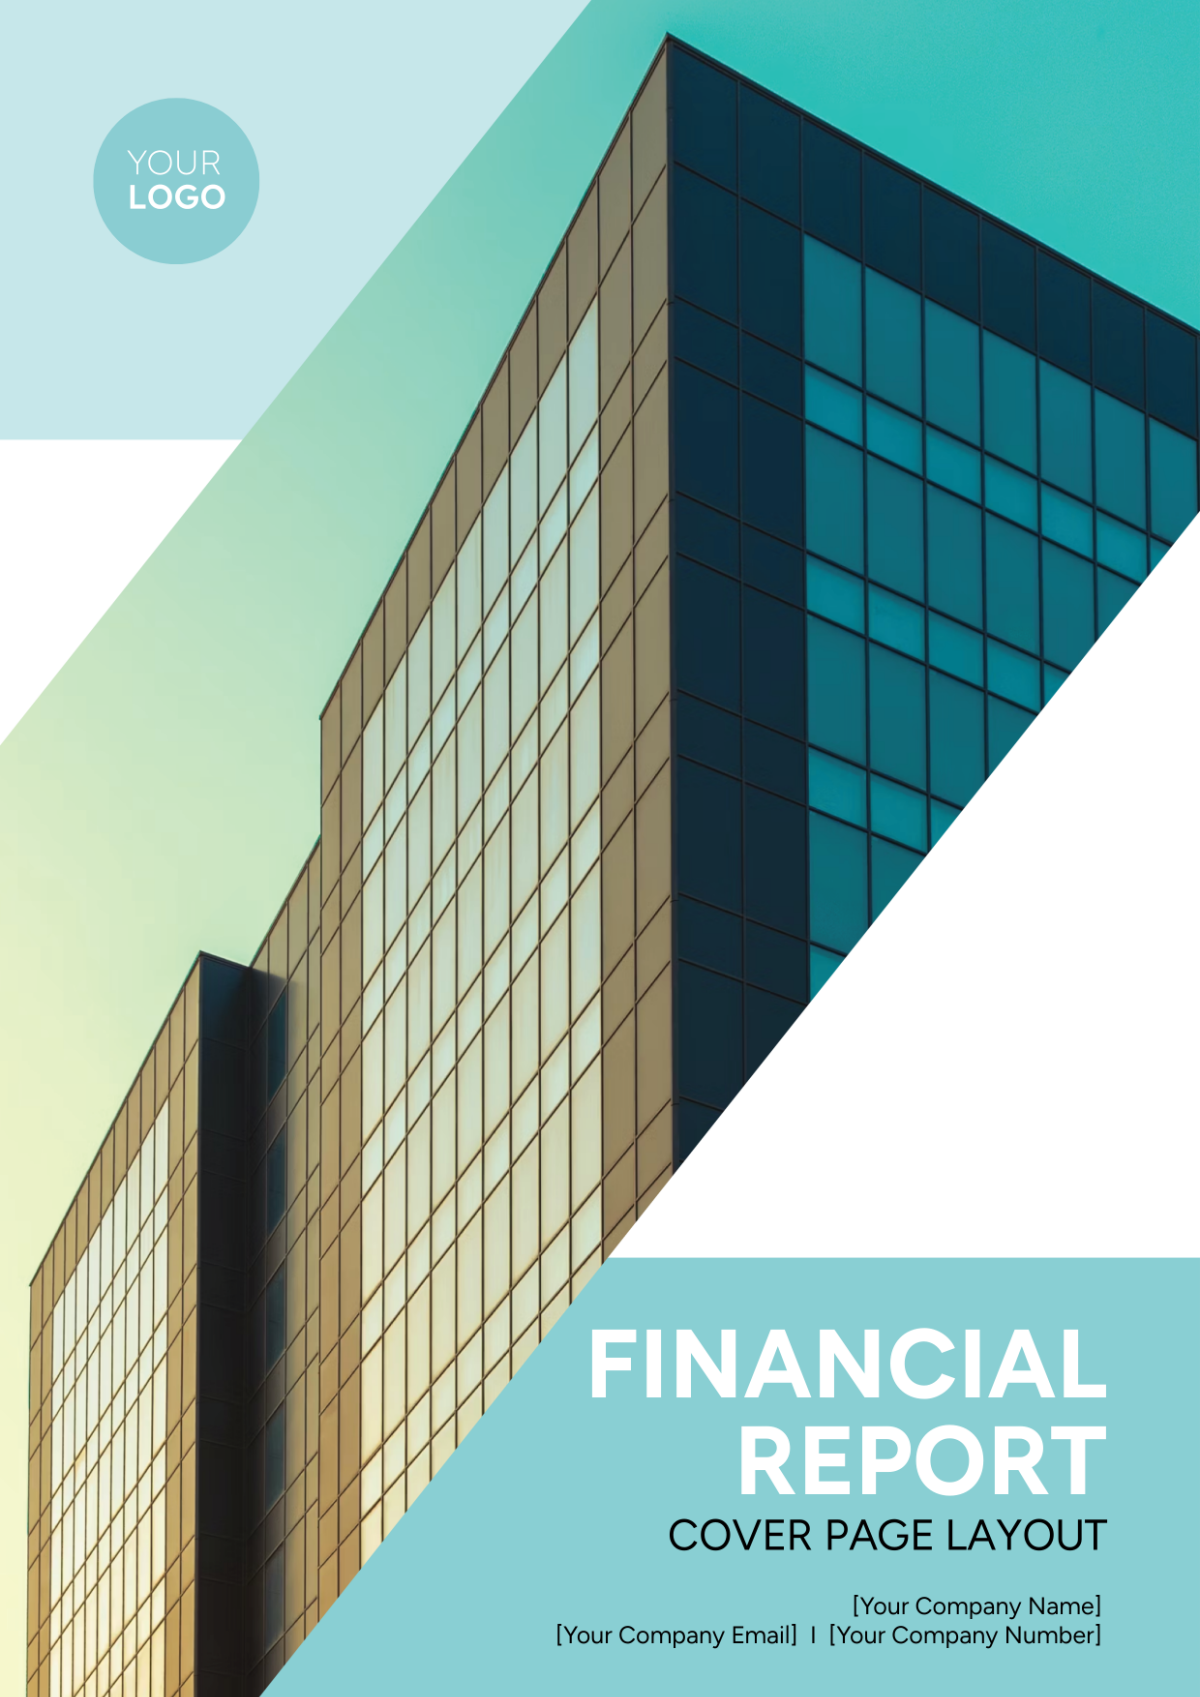 Financial Report Cover Page Layout